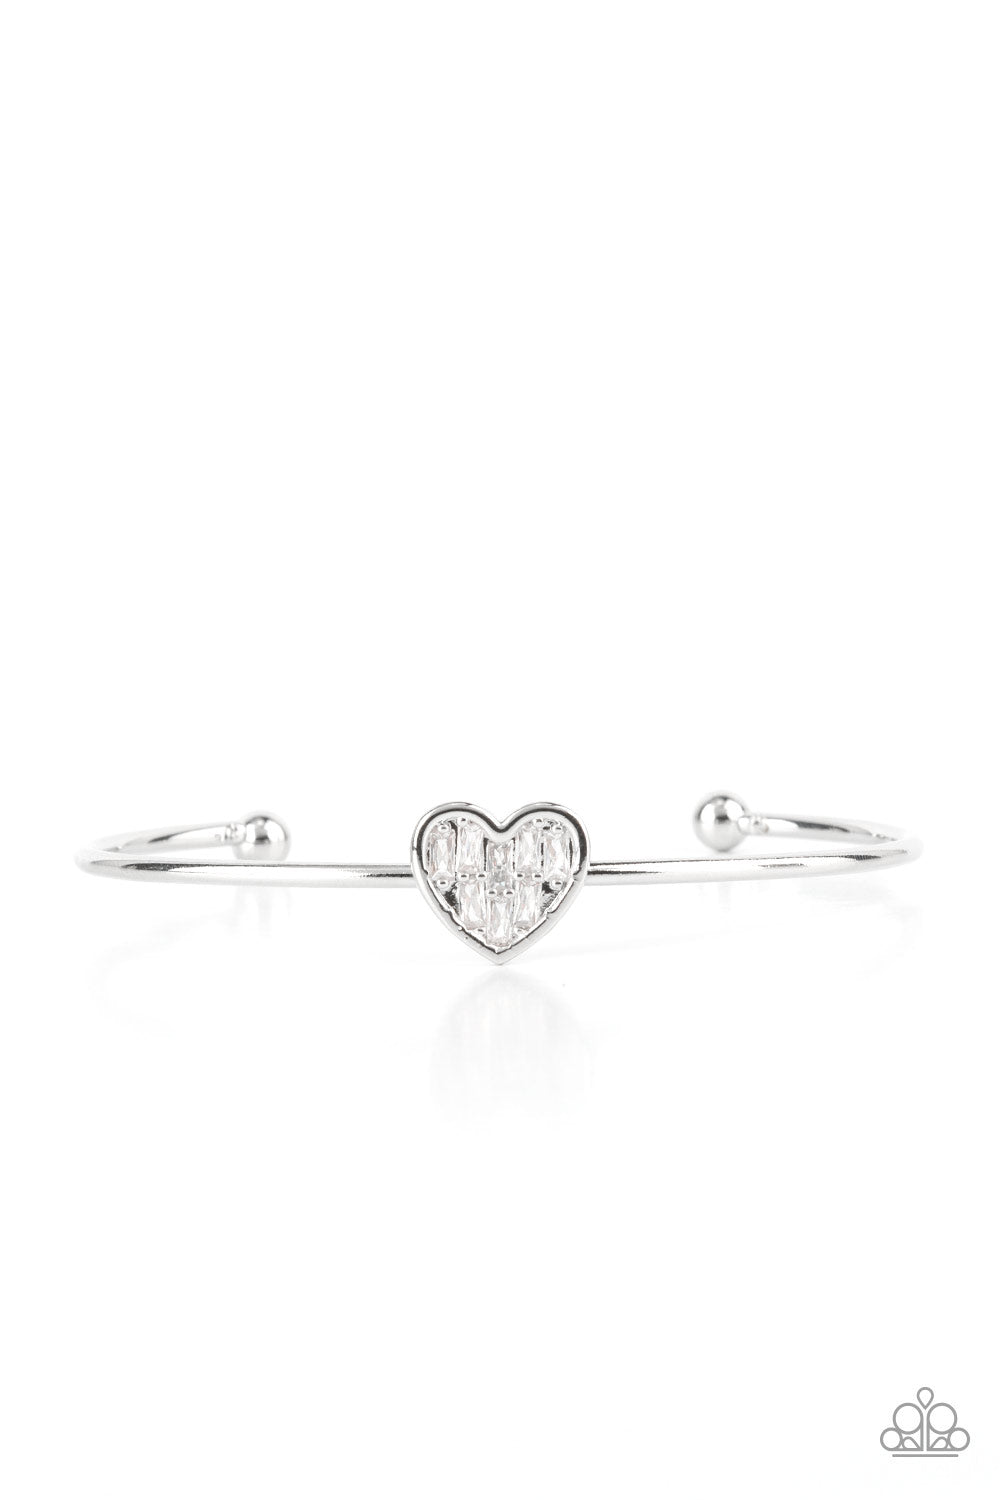 Brimming with dainty emerald-cut white rhinestones, a simple silver heart frame sits atop a classic silver bar curved into a simple cuff bracelet for a whimsical display across the wrist.